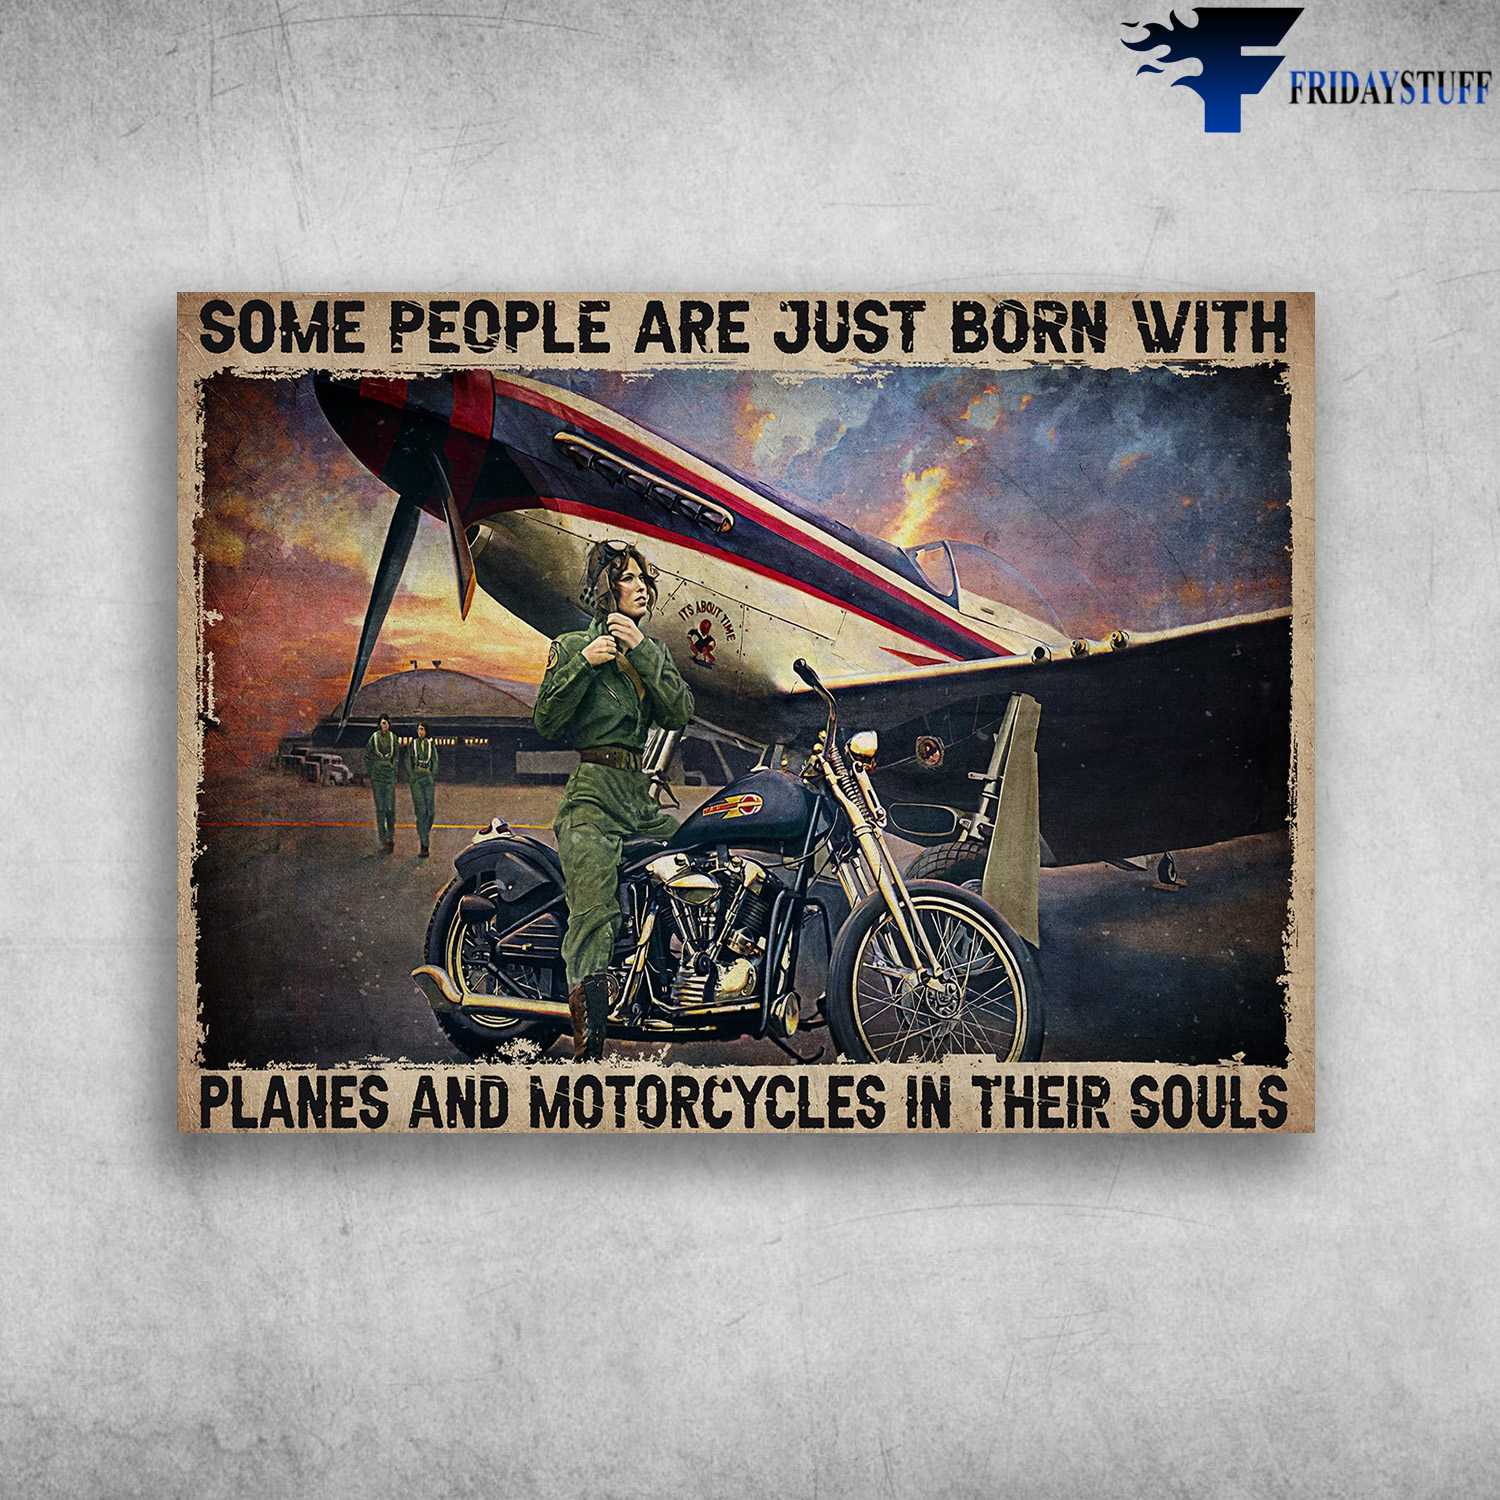 Motorcycle And Plane, Biker Pilot - Some People Are Just Born With, Planes And Motorcycles In Their Souls